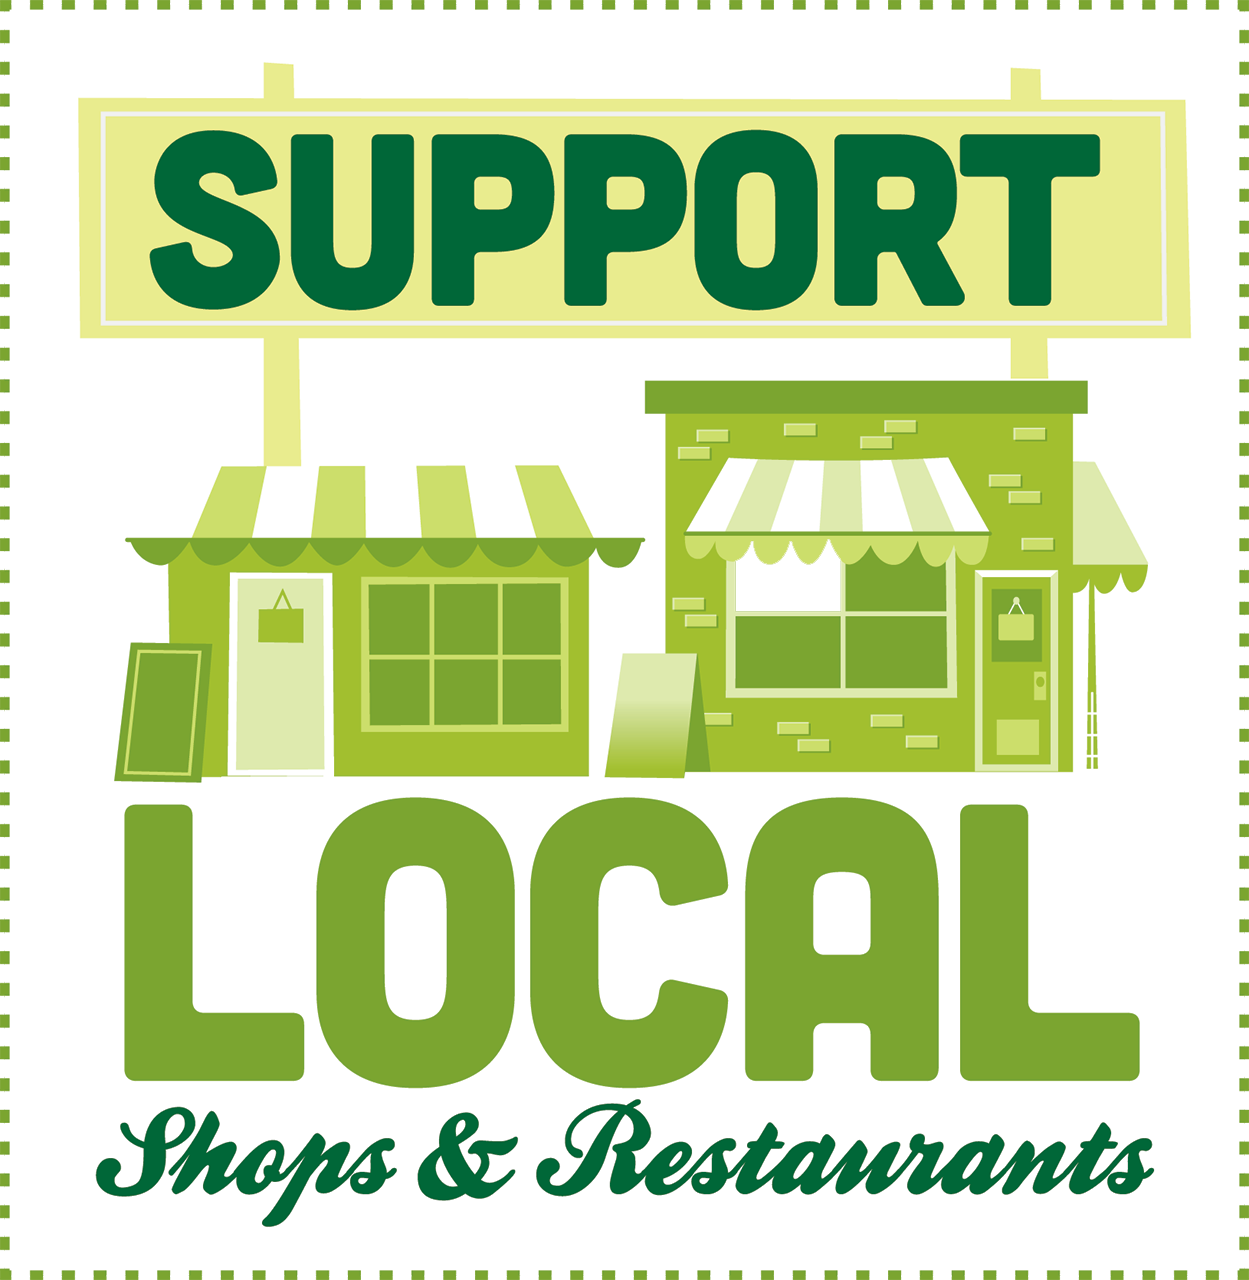 Other Ways To Support Local Business